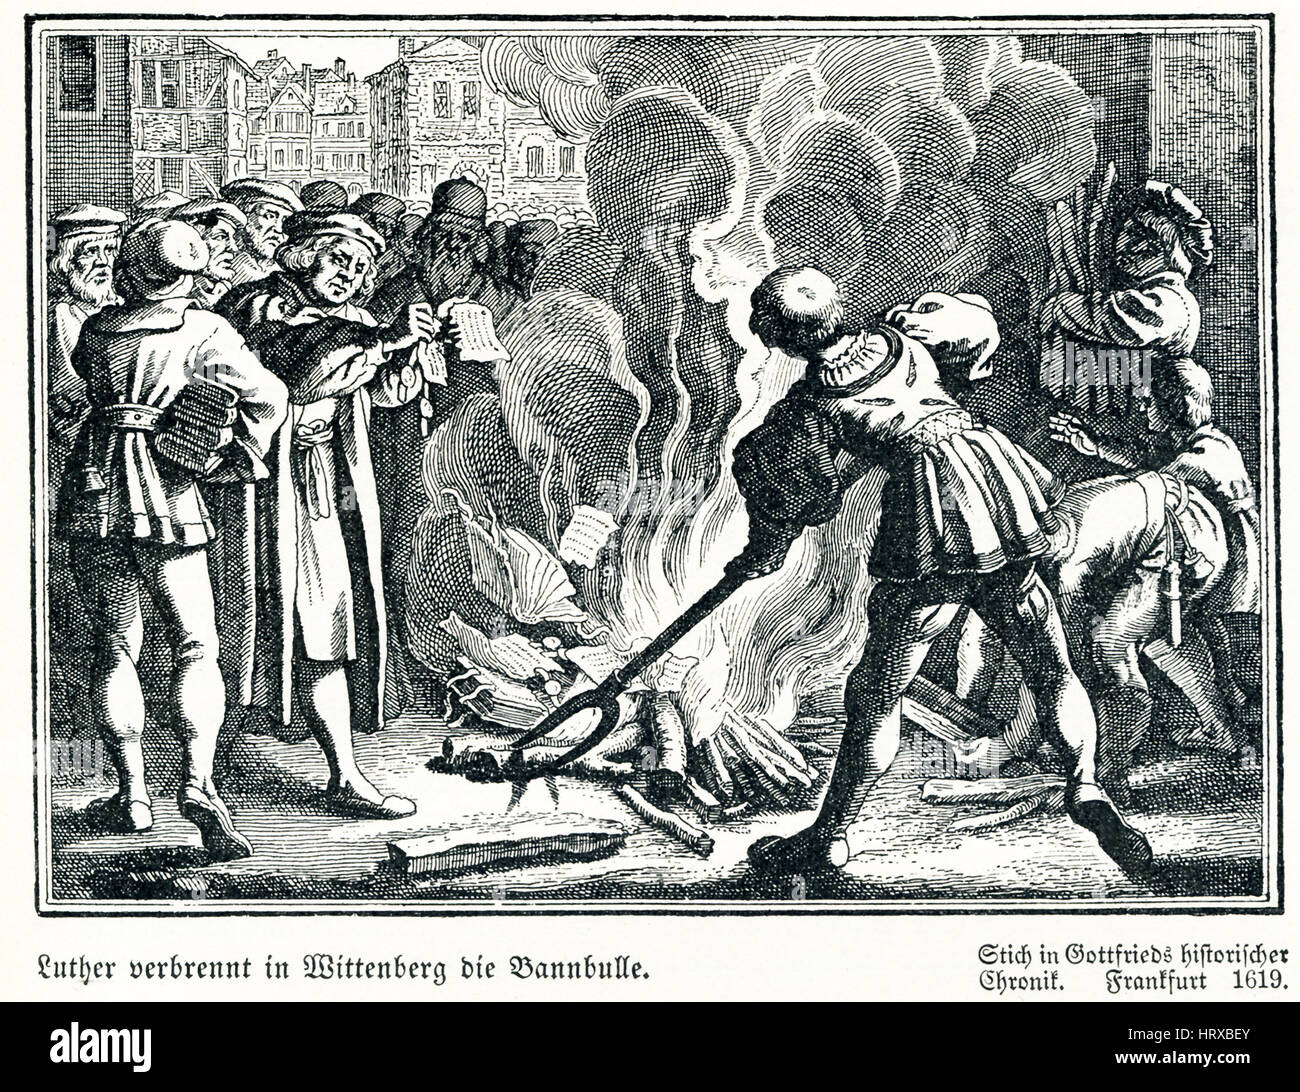 Luther burns the Papal Bull in Wittenberg. Martin Luther burns the papal bull in Wittenberg. This illustration appeared in Gottfried's Historical Chronicle, Frankfurt in 1619. The so-called 'Exsurge Domine' was a papal bull issued by Pope Leo X on June 15, 1520. The pope issued it in response to Martin Luther, who would become a promiment leader of the Protestant Reformation, posting his 95 Theses in 1517. The bull demanded that Luther retract many of his statements, which the bull called errors, by December 20. Luther did not and on December 20, Luther burned the bull, as shown here. Stock Photo